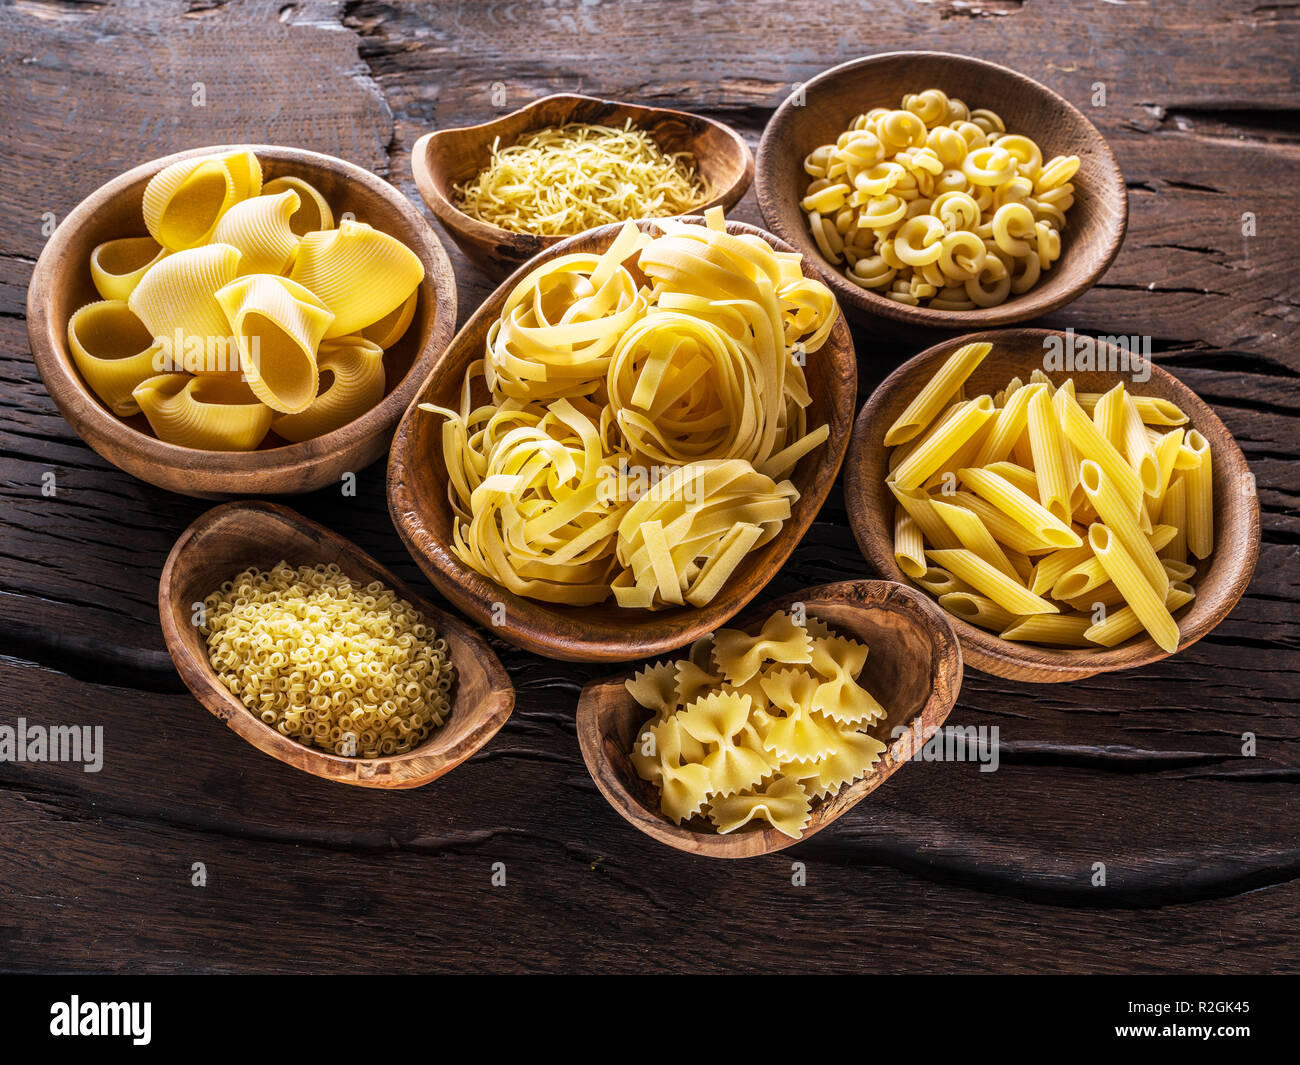 Different pasta types in wooden bowls on the table. Top view. Stock Photo